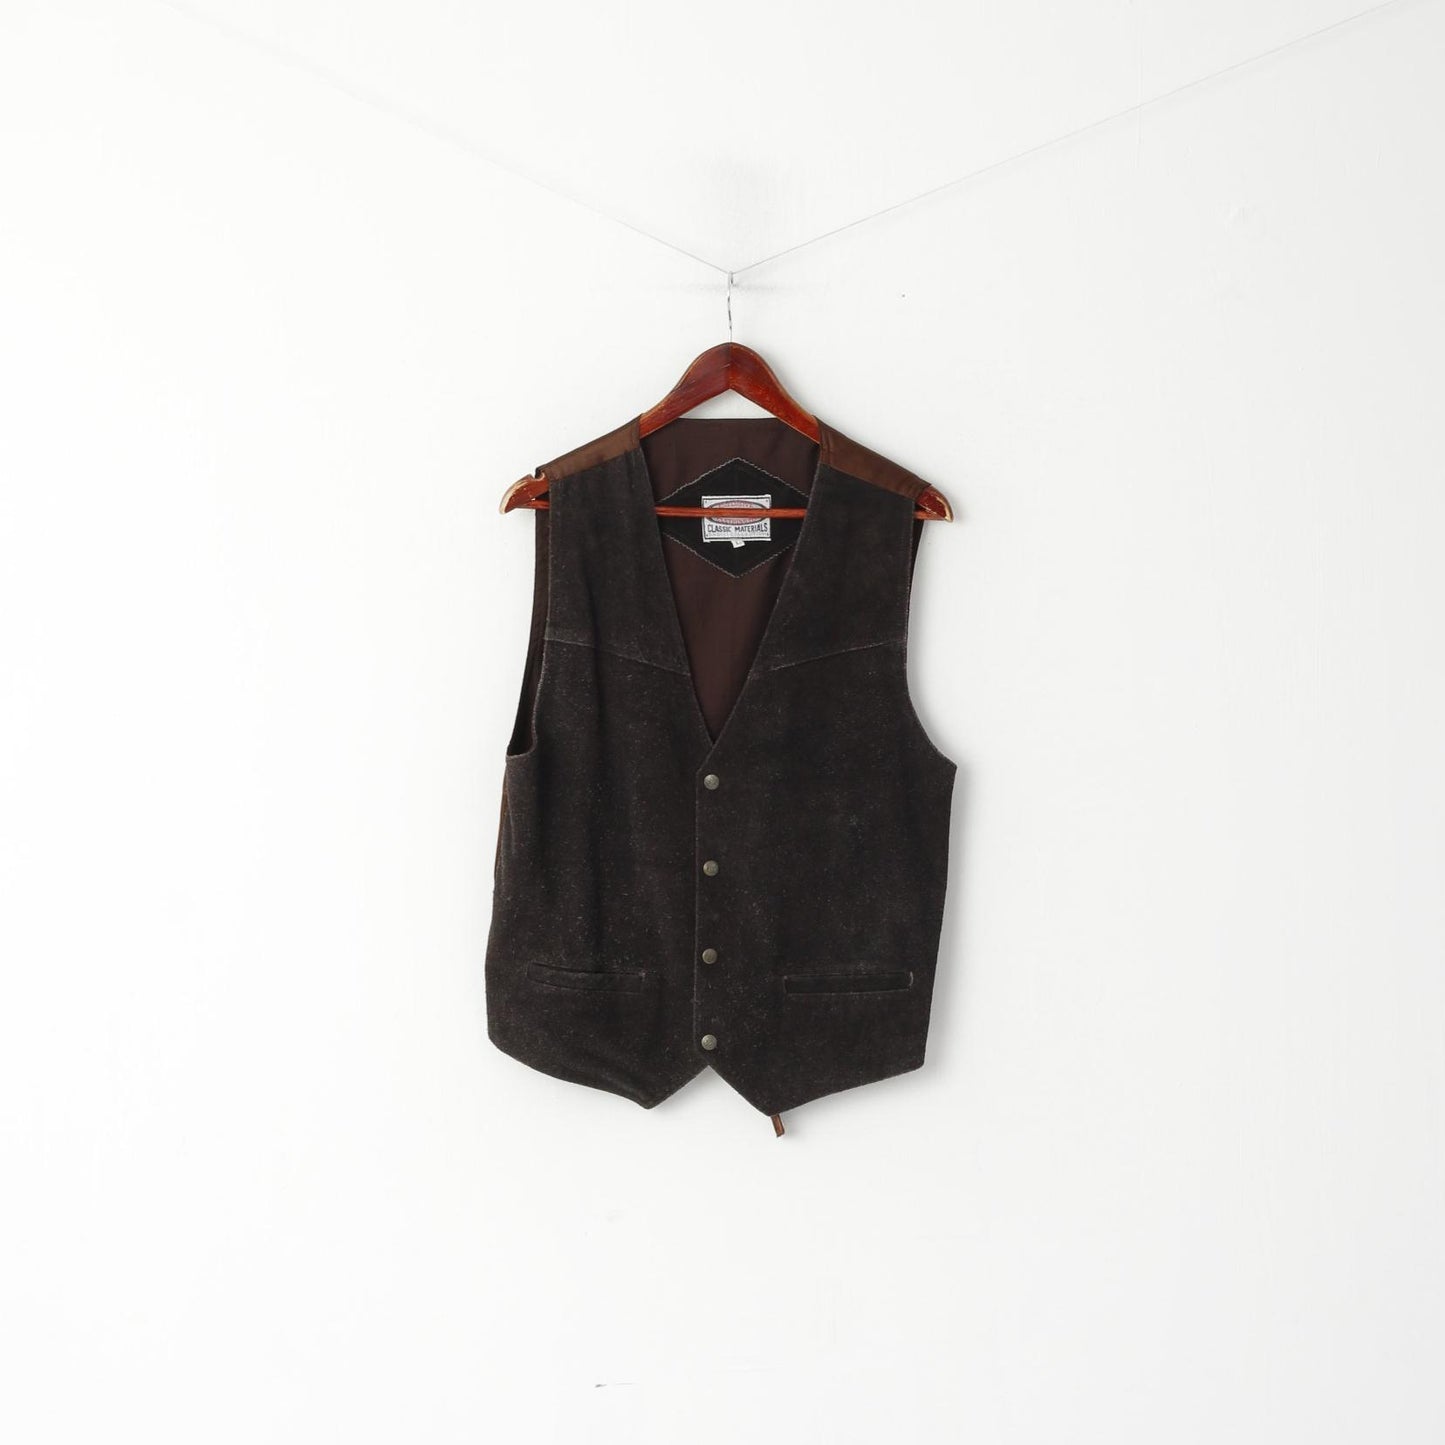 Peanuts Clothing Men L Vest Brown Leather Vintage Snaps Country Waistcoat